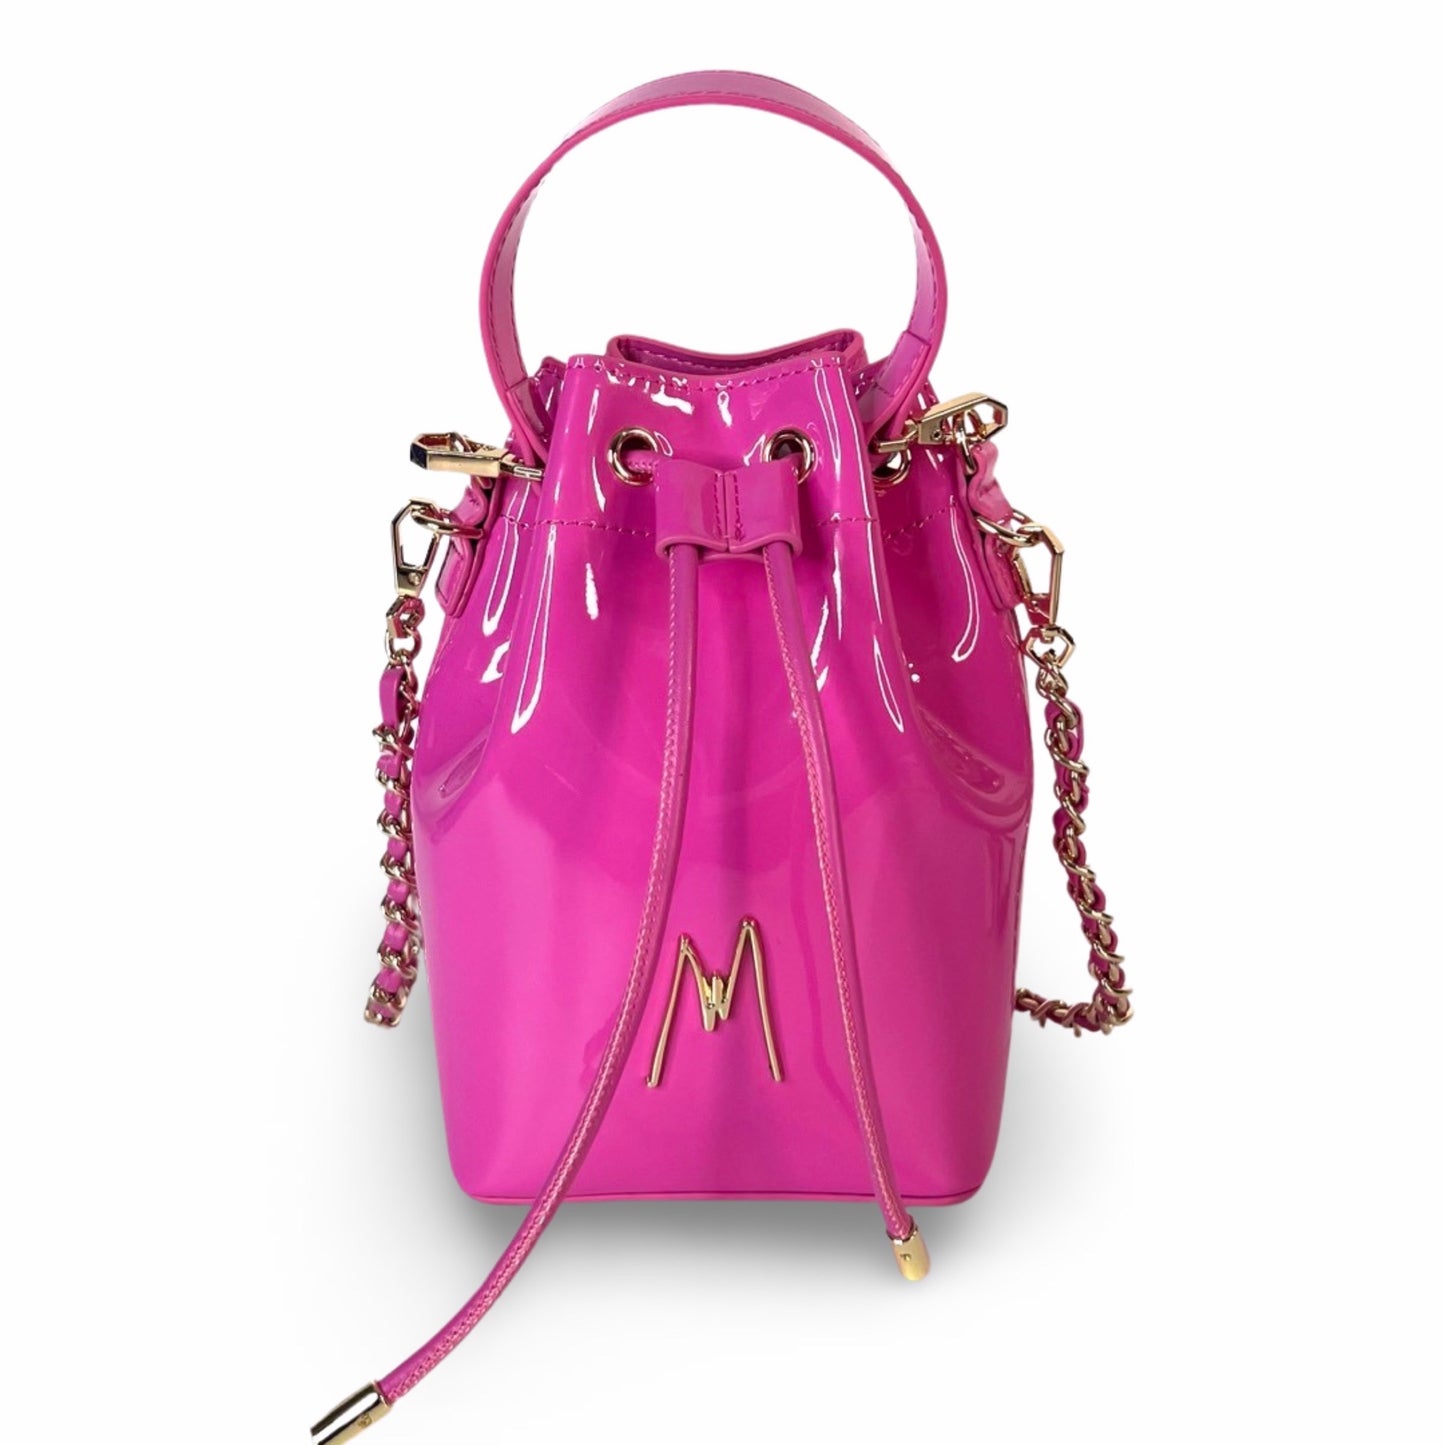 "THE BUCKET BAG" - Pink Patent Leather